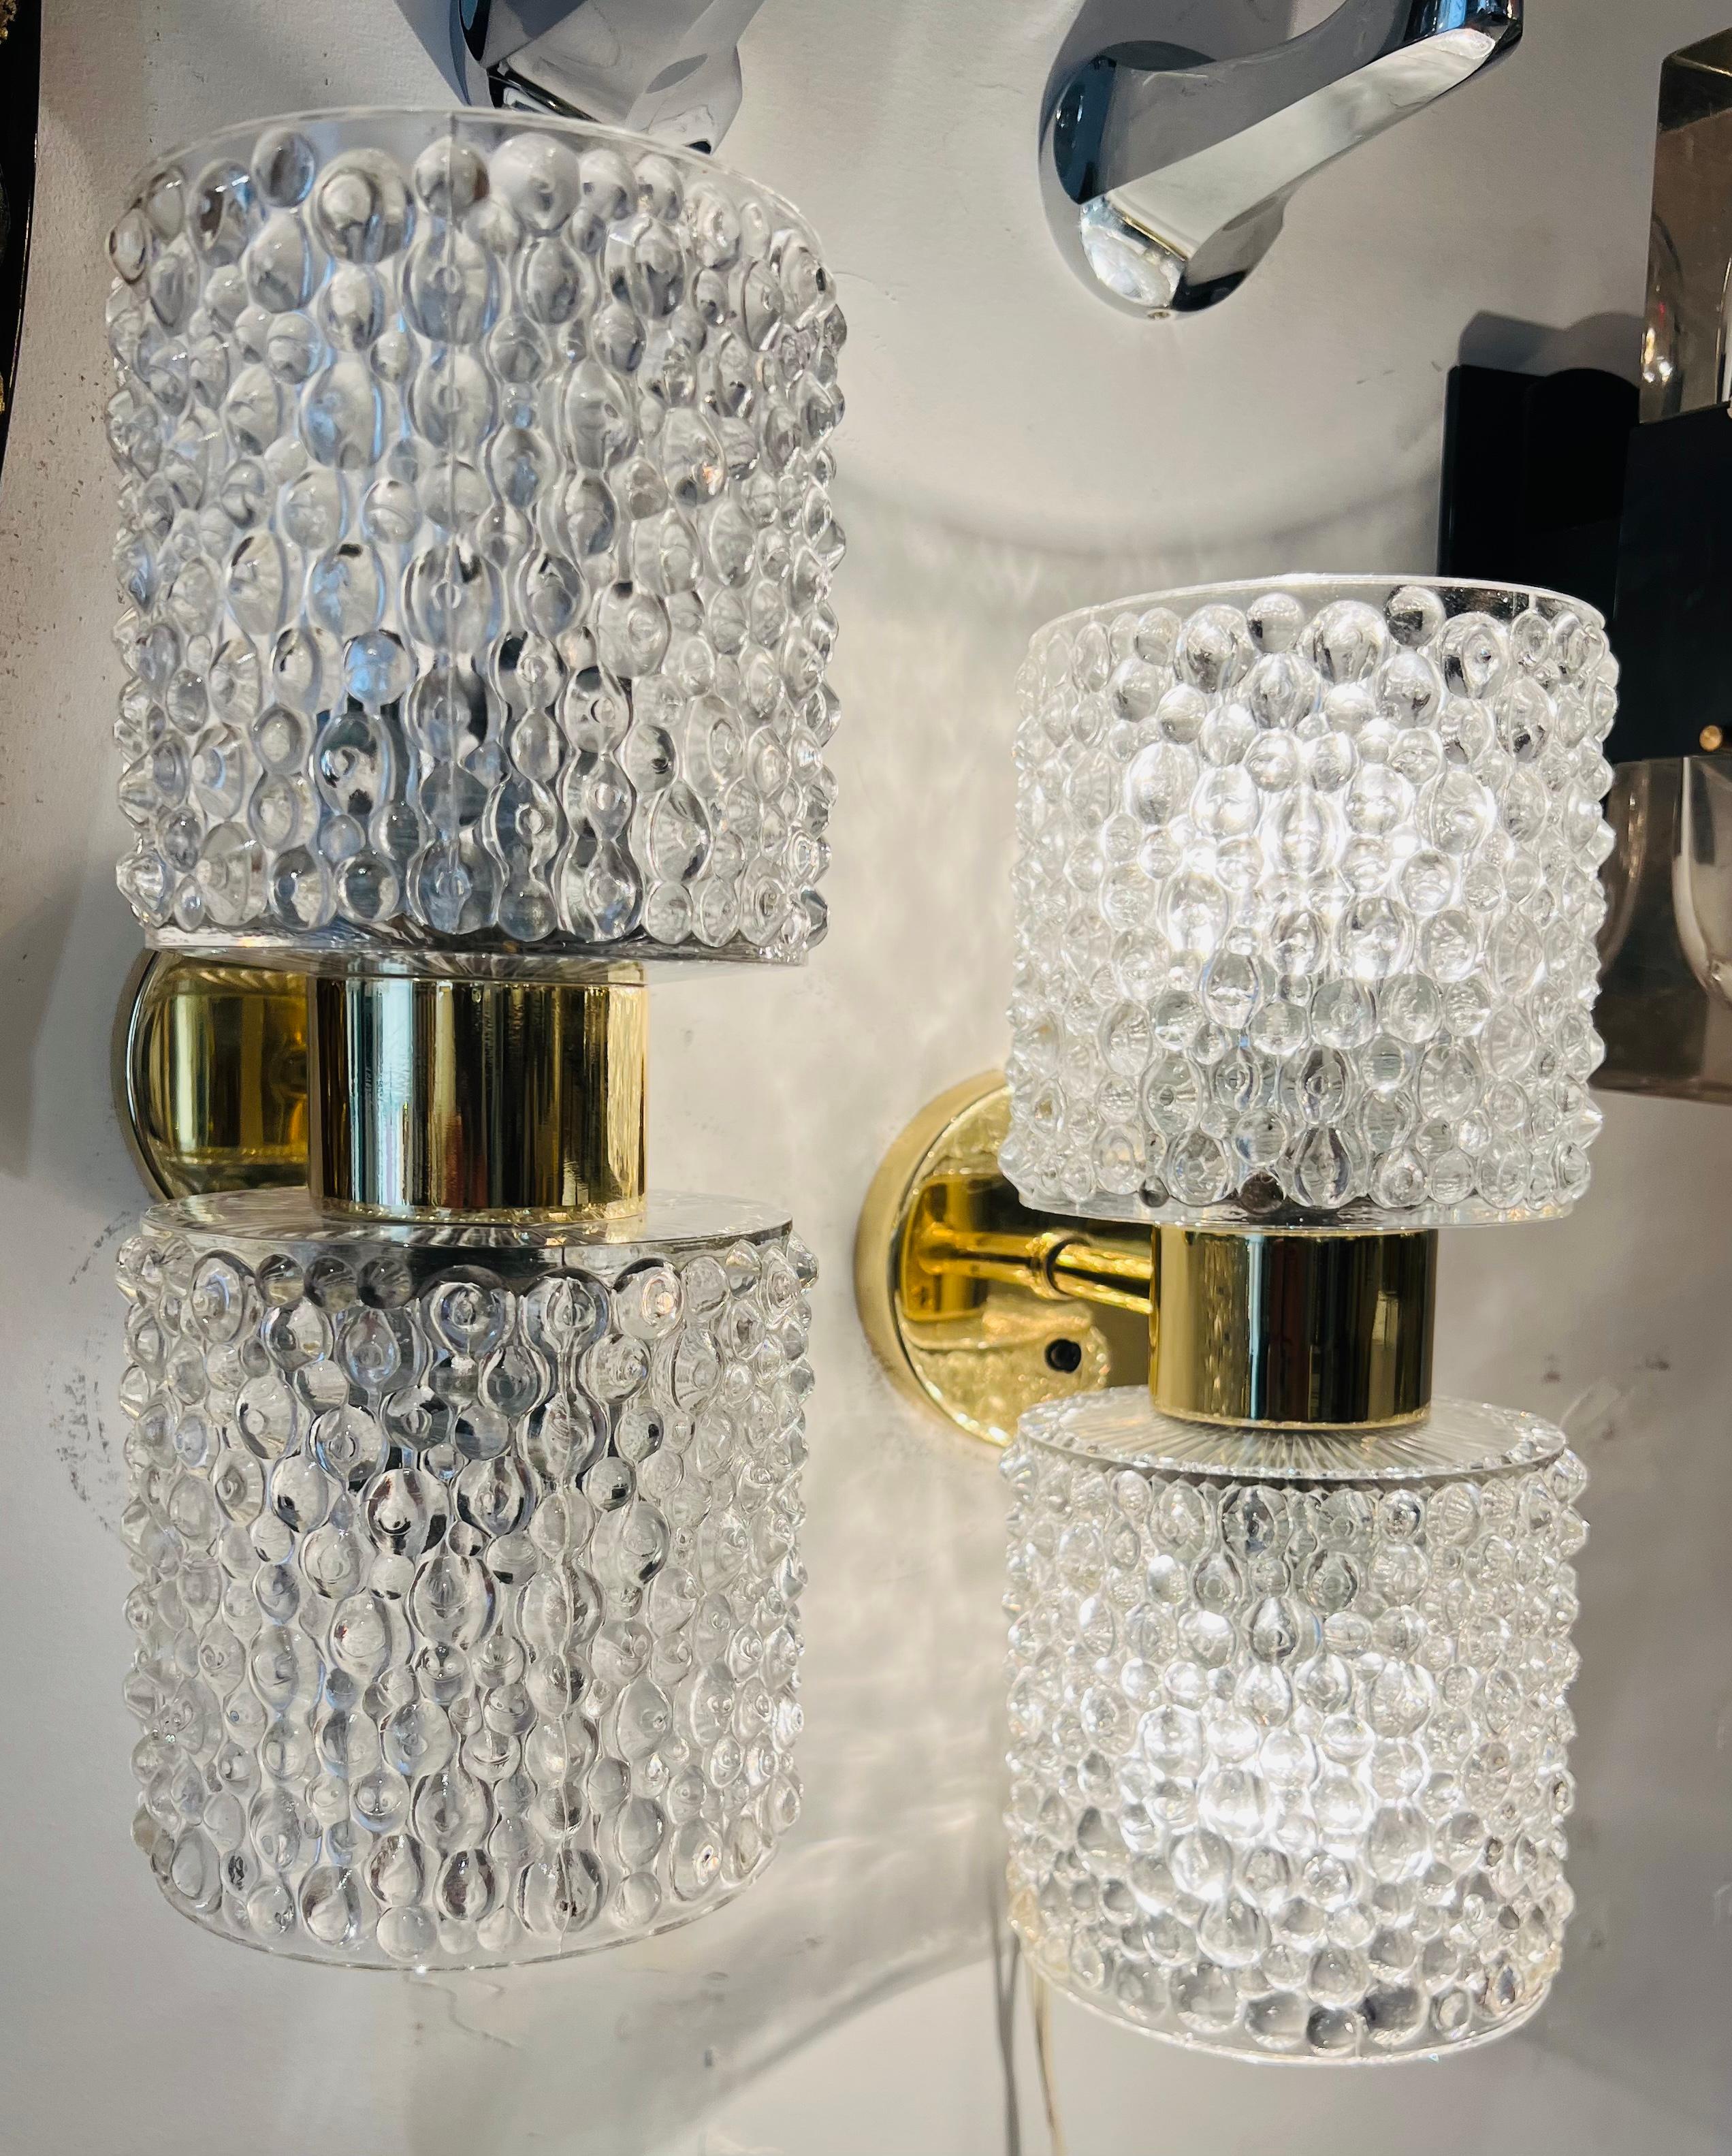 A stunning pair of golden polished brass sconces with heavy bubble crystal glass shades by the famed Dutch lighting company, Raak. Newly rewired. Two candelabra sockets per wall lamp.